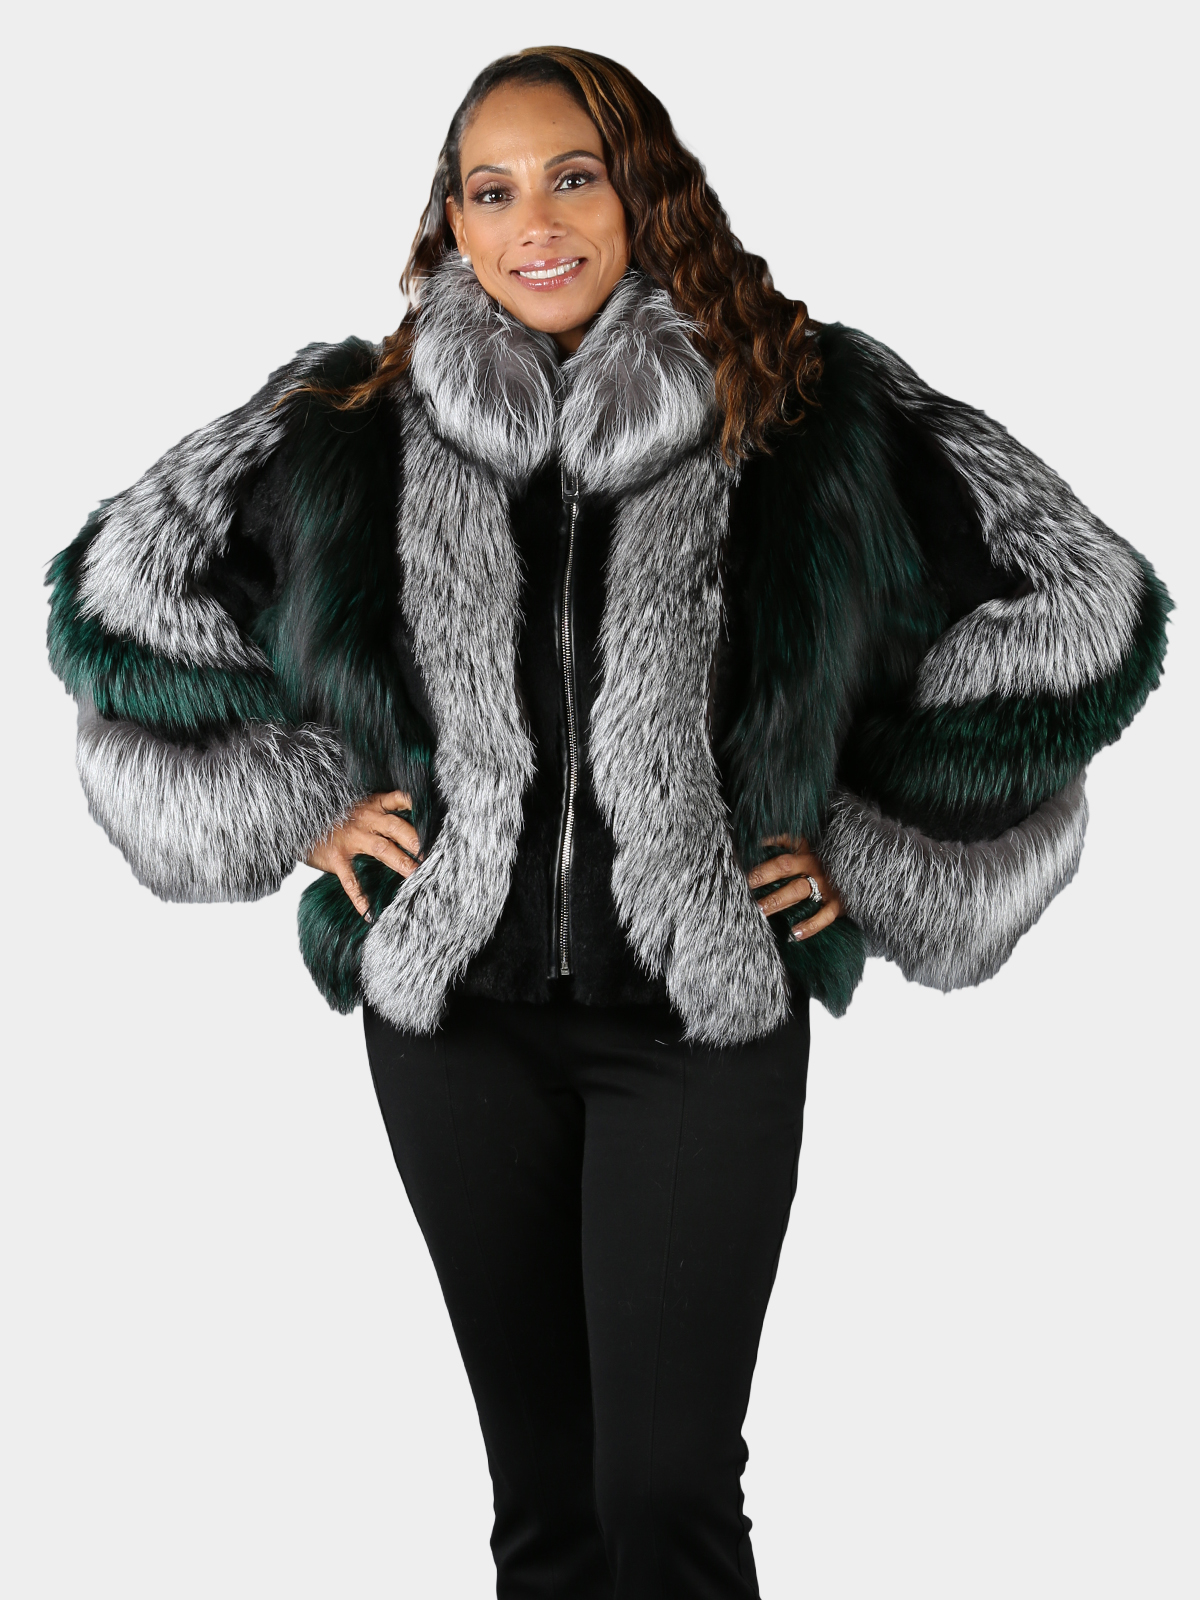 Woman's Natural Silver Fox and Green Dyed Fox Fur Jacket